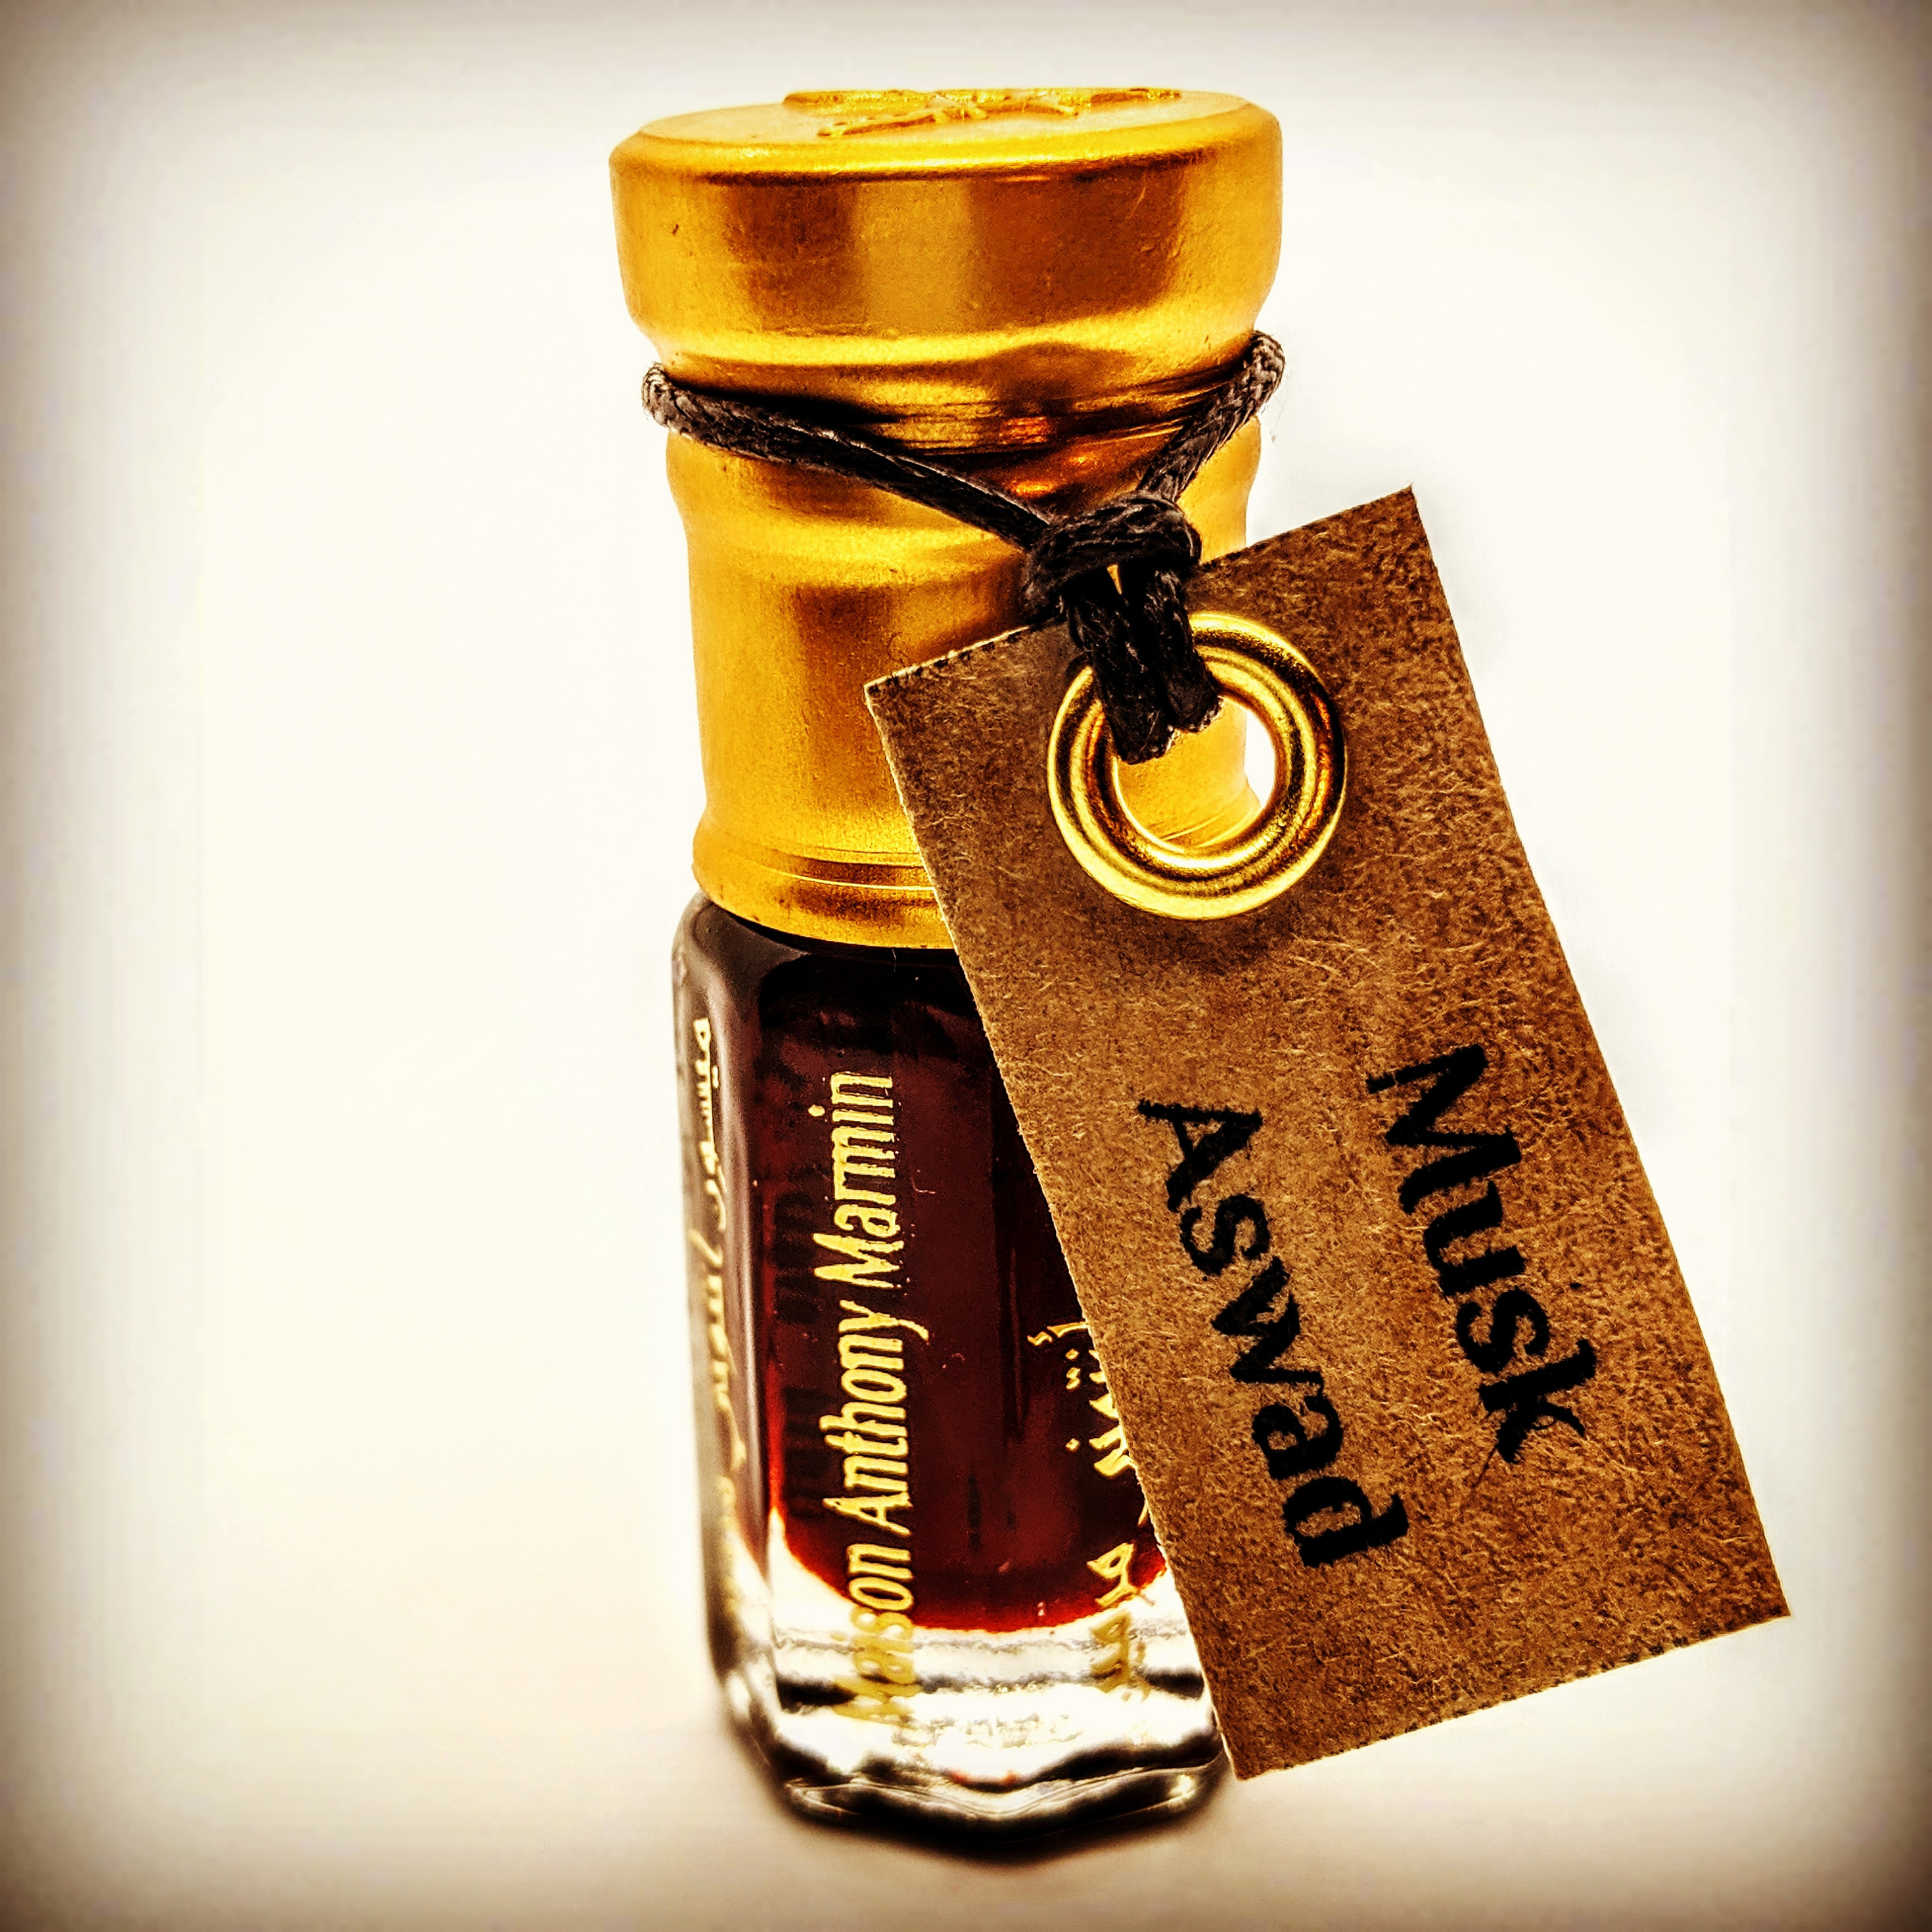 Pure Egyptian Amber Musk Oil Exclusive Original Perfume Oil Ambre  Ambra,musk, Ambar, амбра Imported From Egypt 3ml Roll on Bottle FREE SHIP 